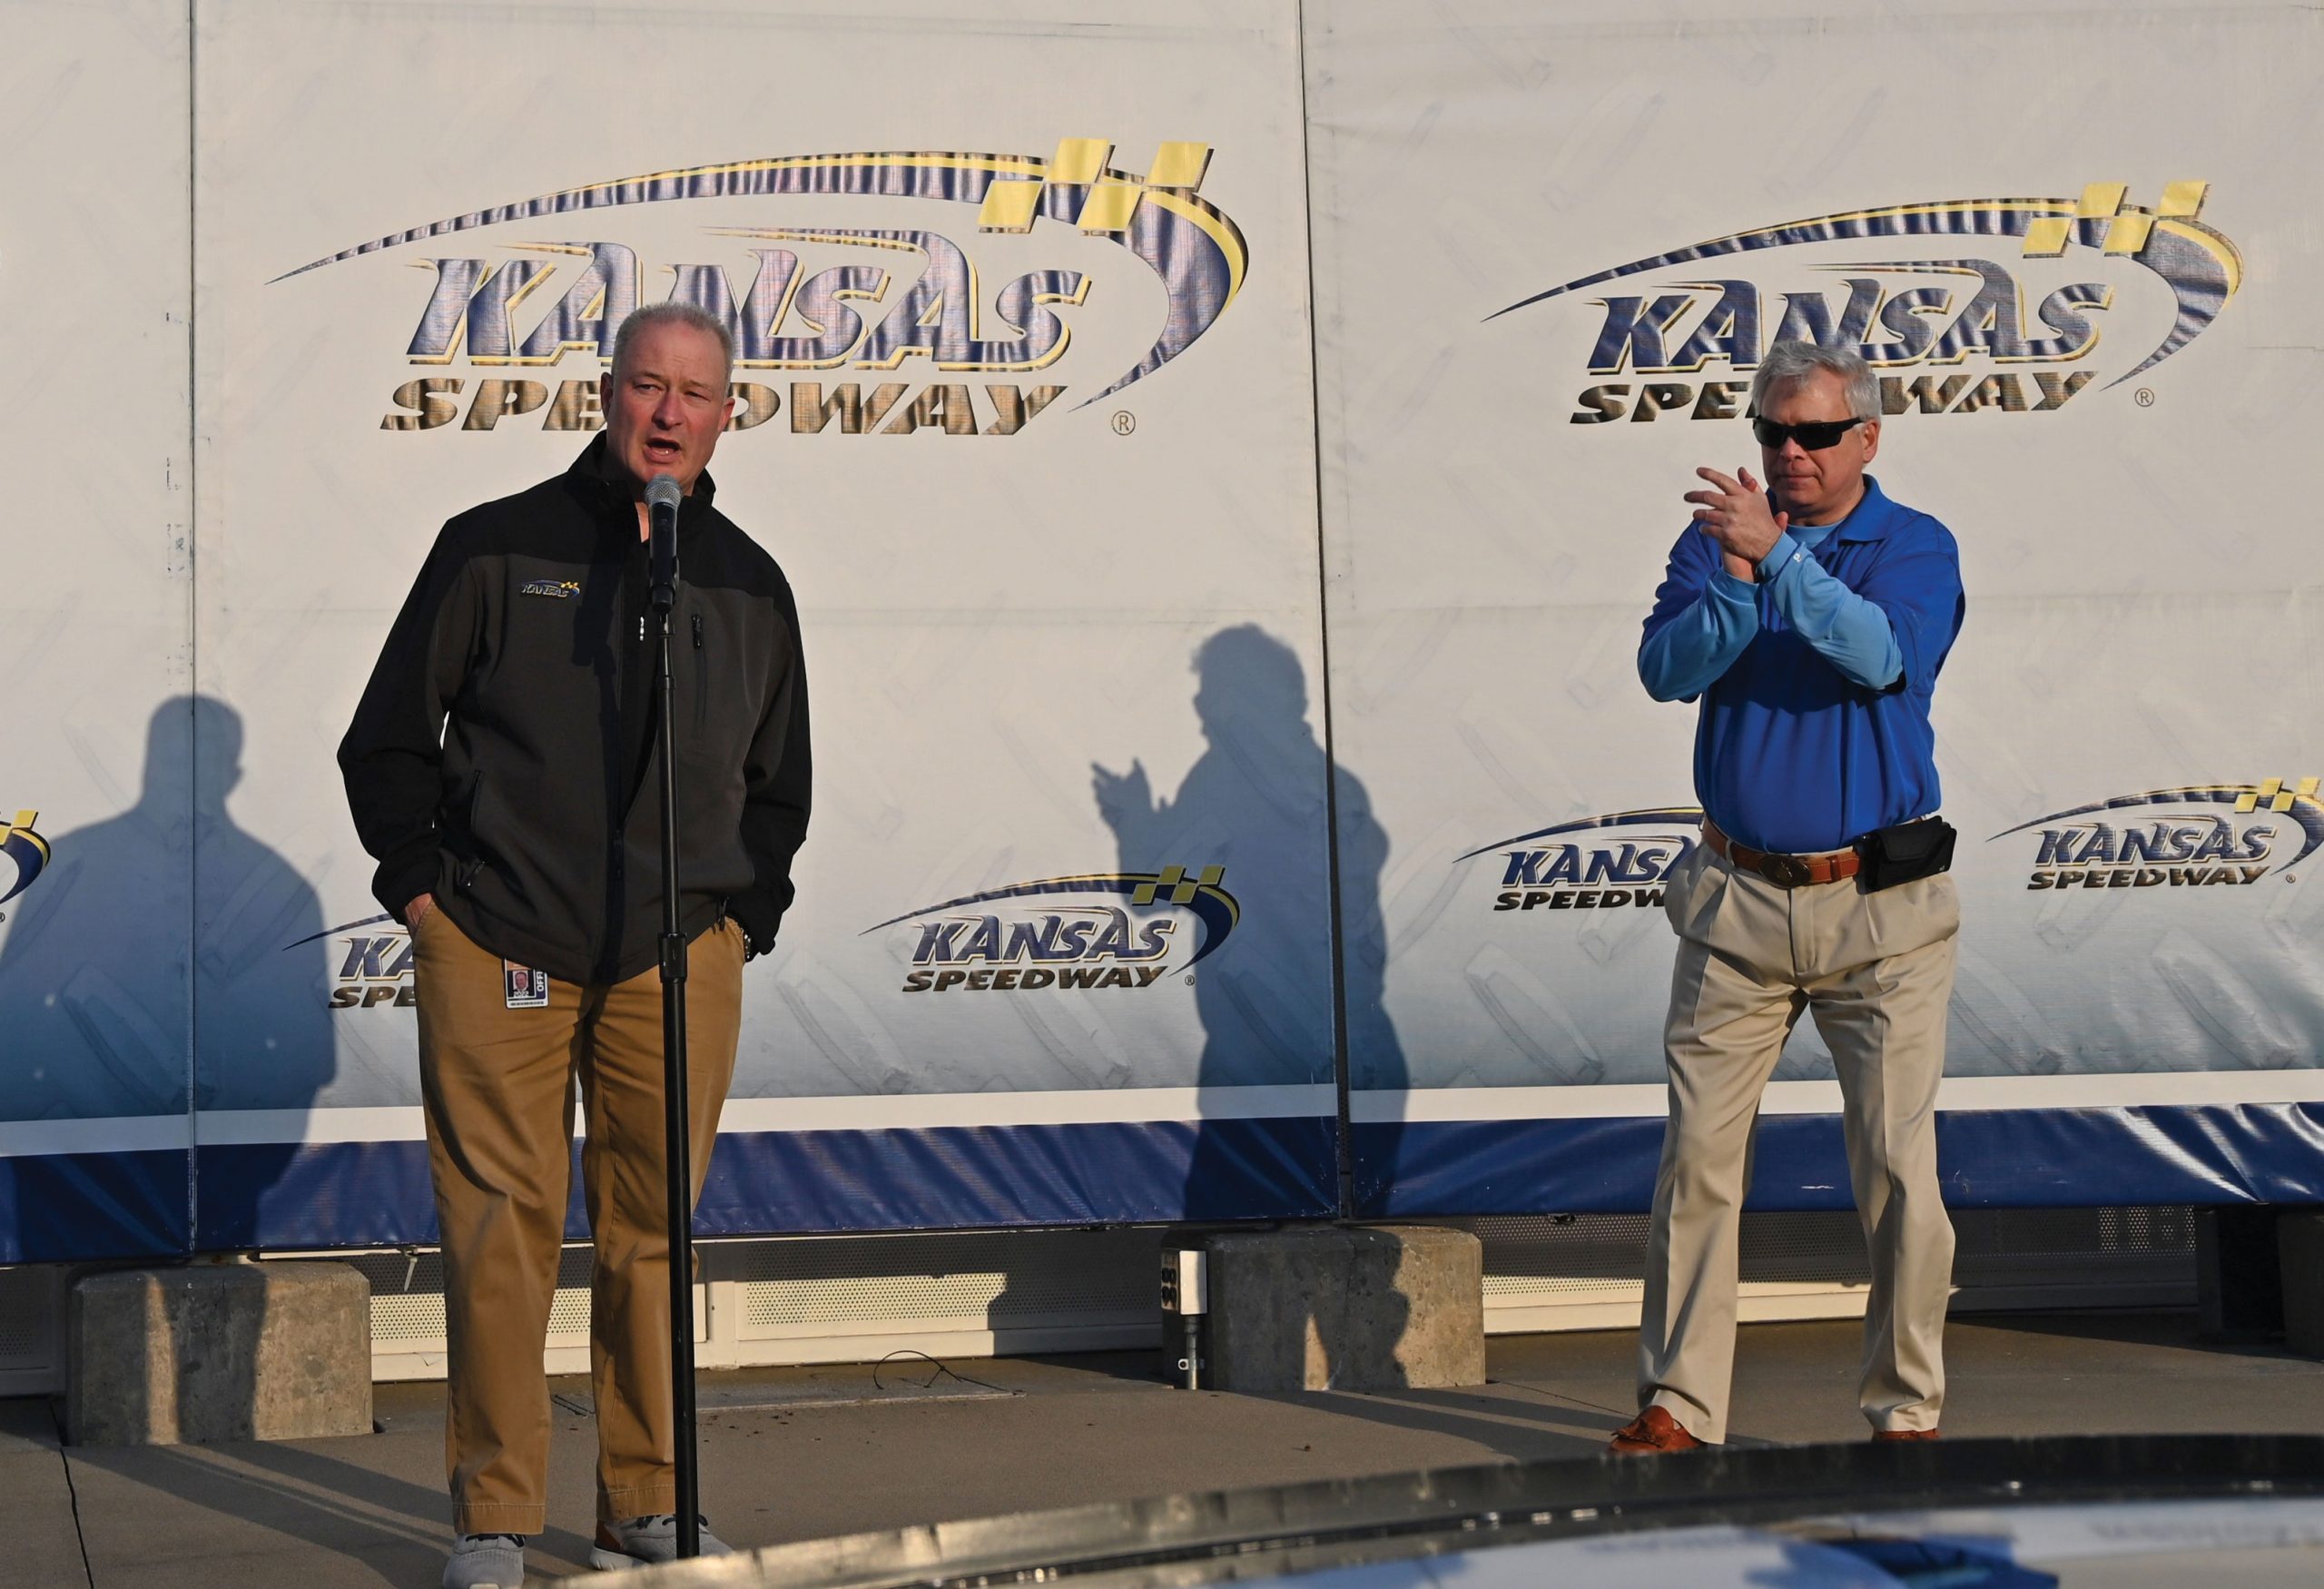 Kansas Speedway President Pat Warren, left, and CGSC Foundation President/CEO Rod Cox welcome attendees to the CGSC Foundation fundraising event at the Kansas Speedway on April 15, 2022.